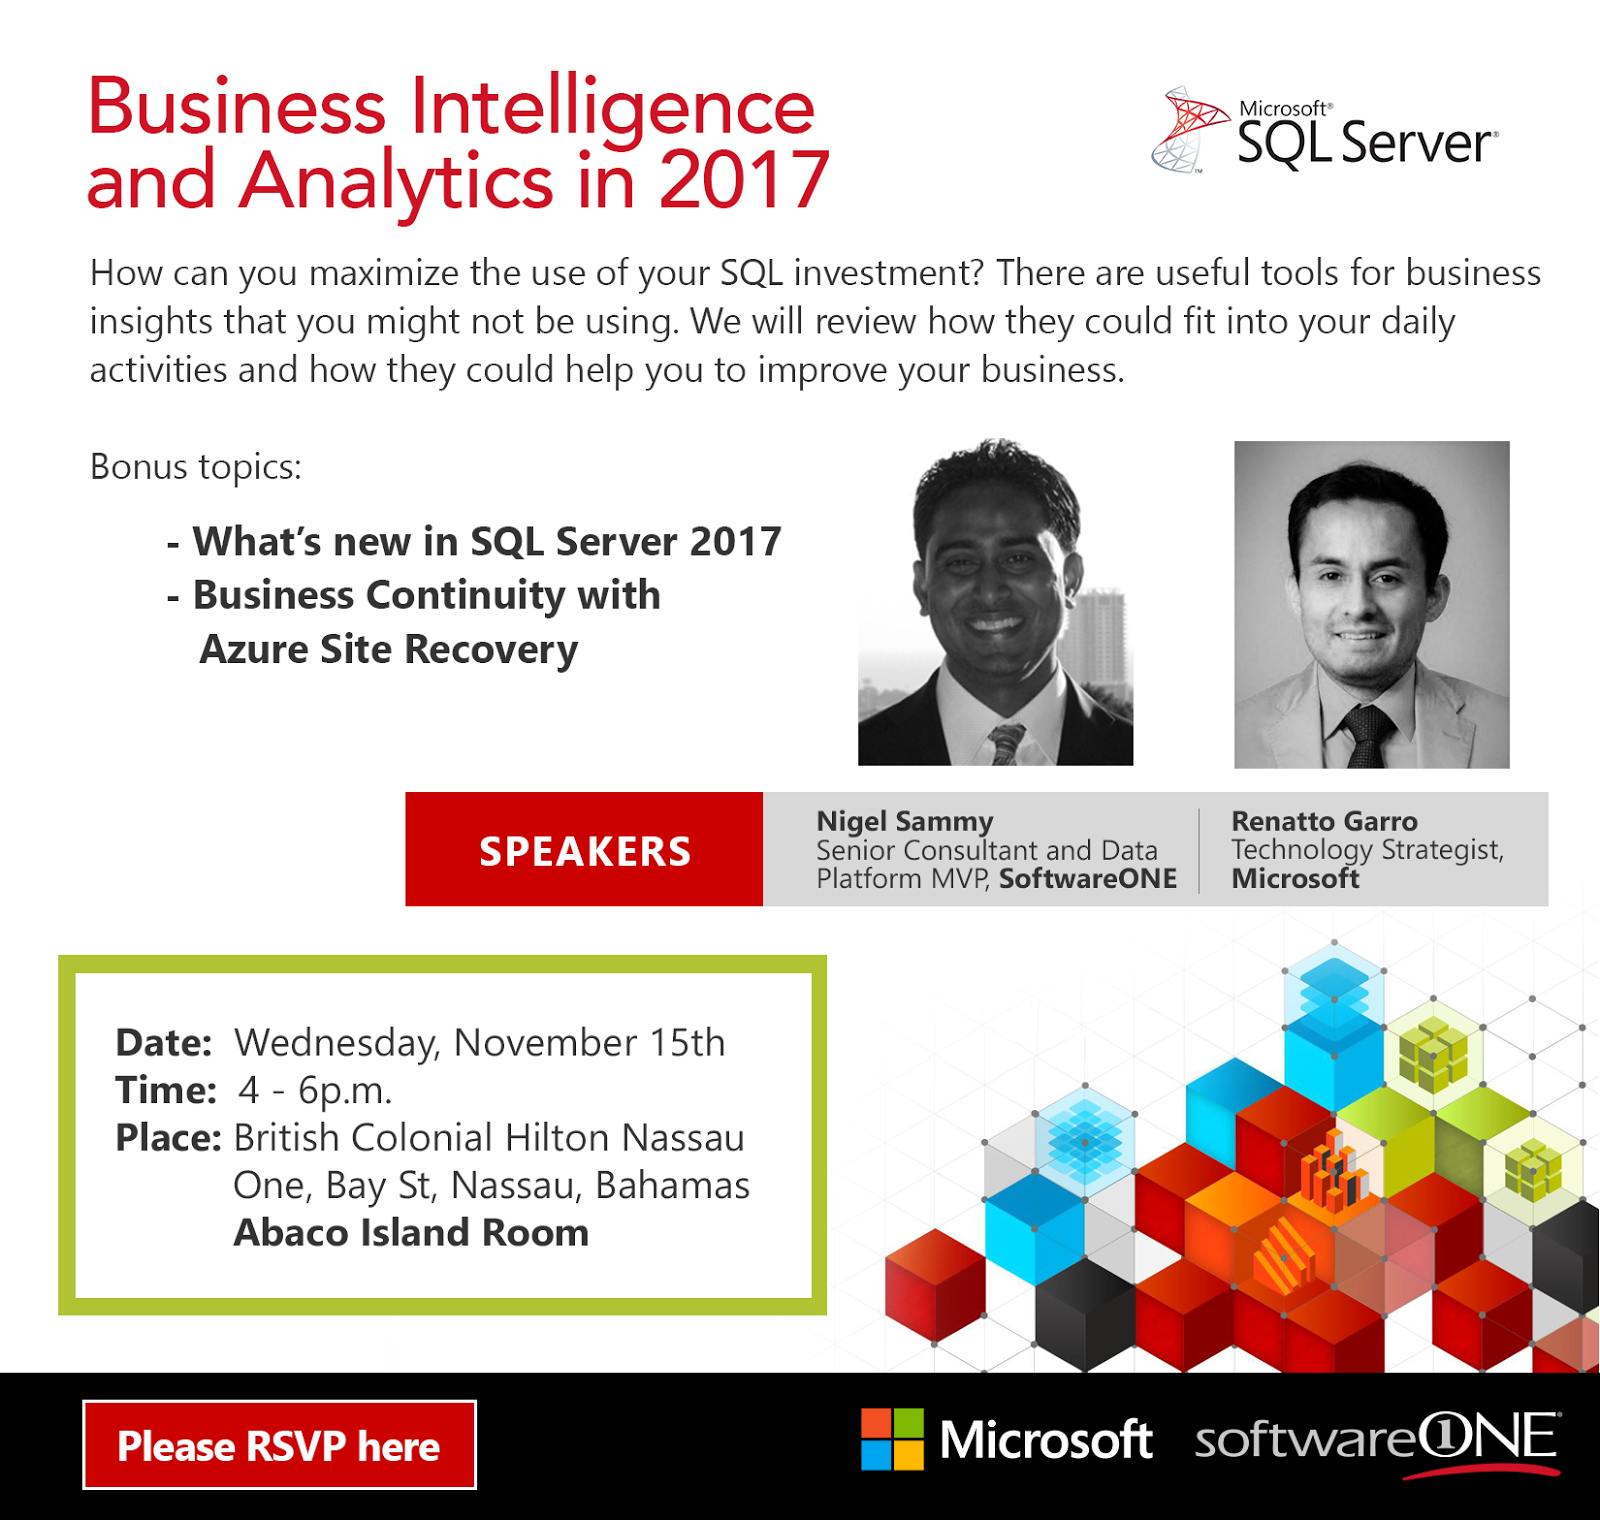 https://www.eventbrite.com/e/business-intelligence-and-analytics-in-2017-tickets-39464149333